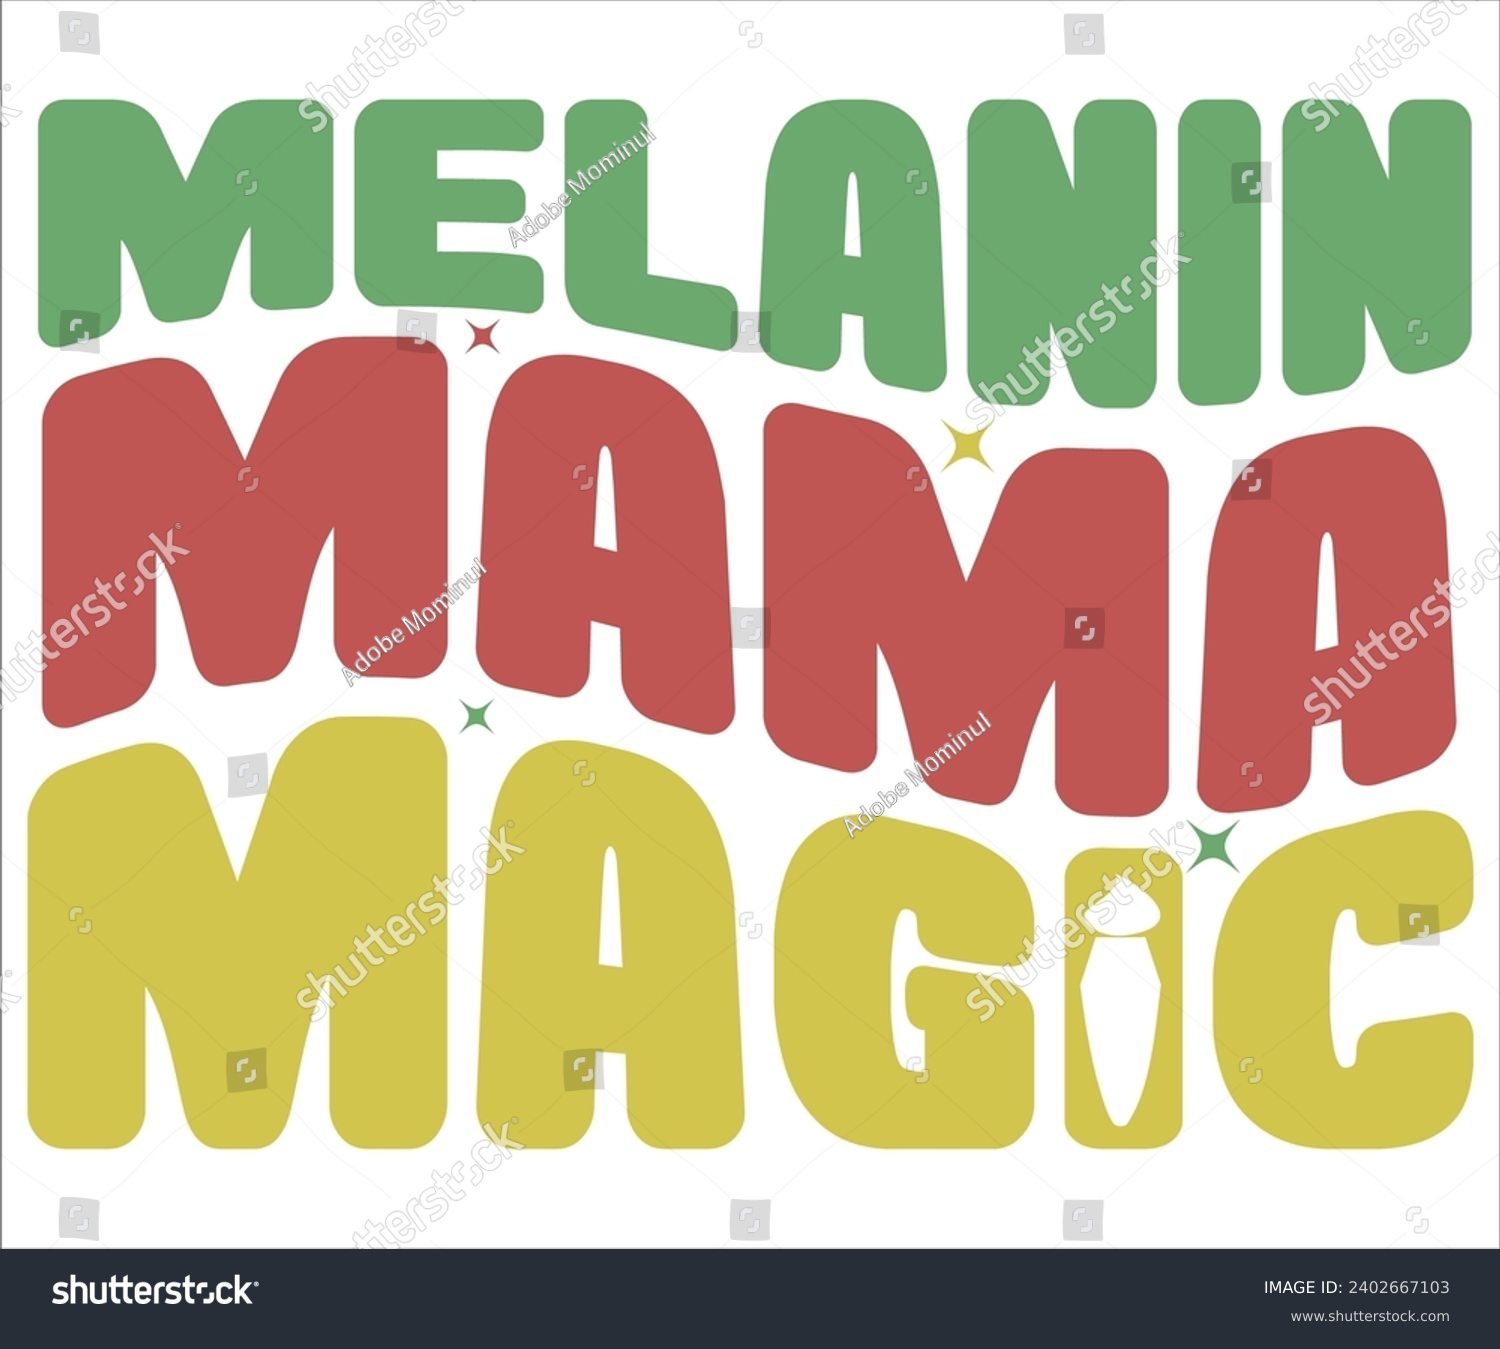 SVG of Melanin mama magic Svg,Black History Month Svg,Retro,Juneteenth Svg,Black History Quotes,Black People Afro American T shirt,BLM Svg,Black Men Woman,In February in United States and Canada svg